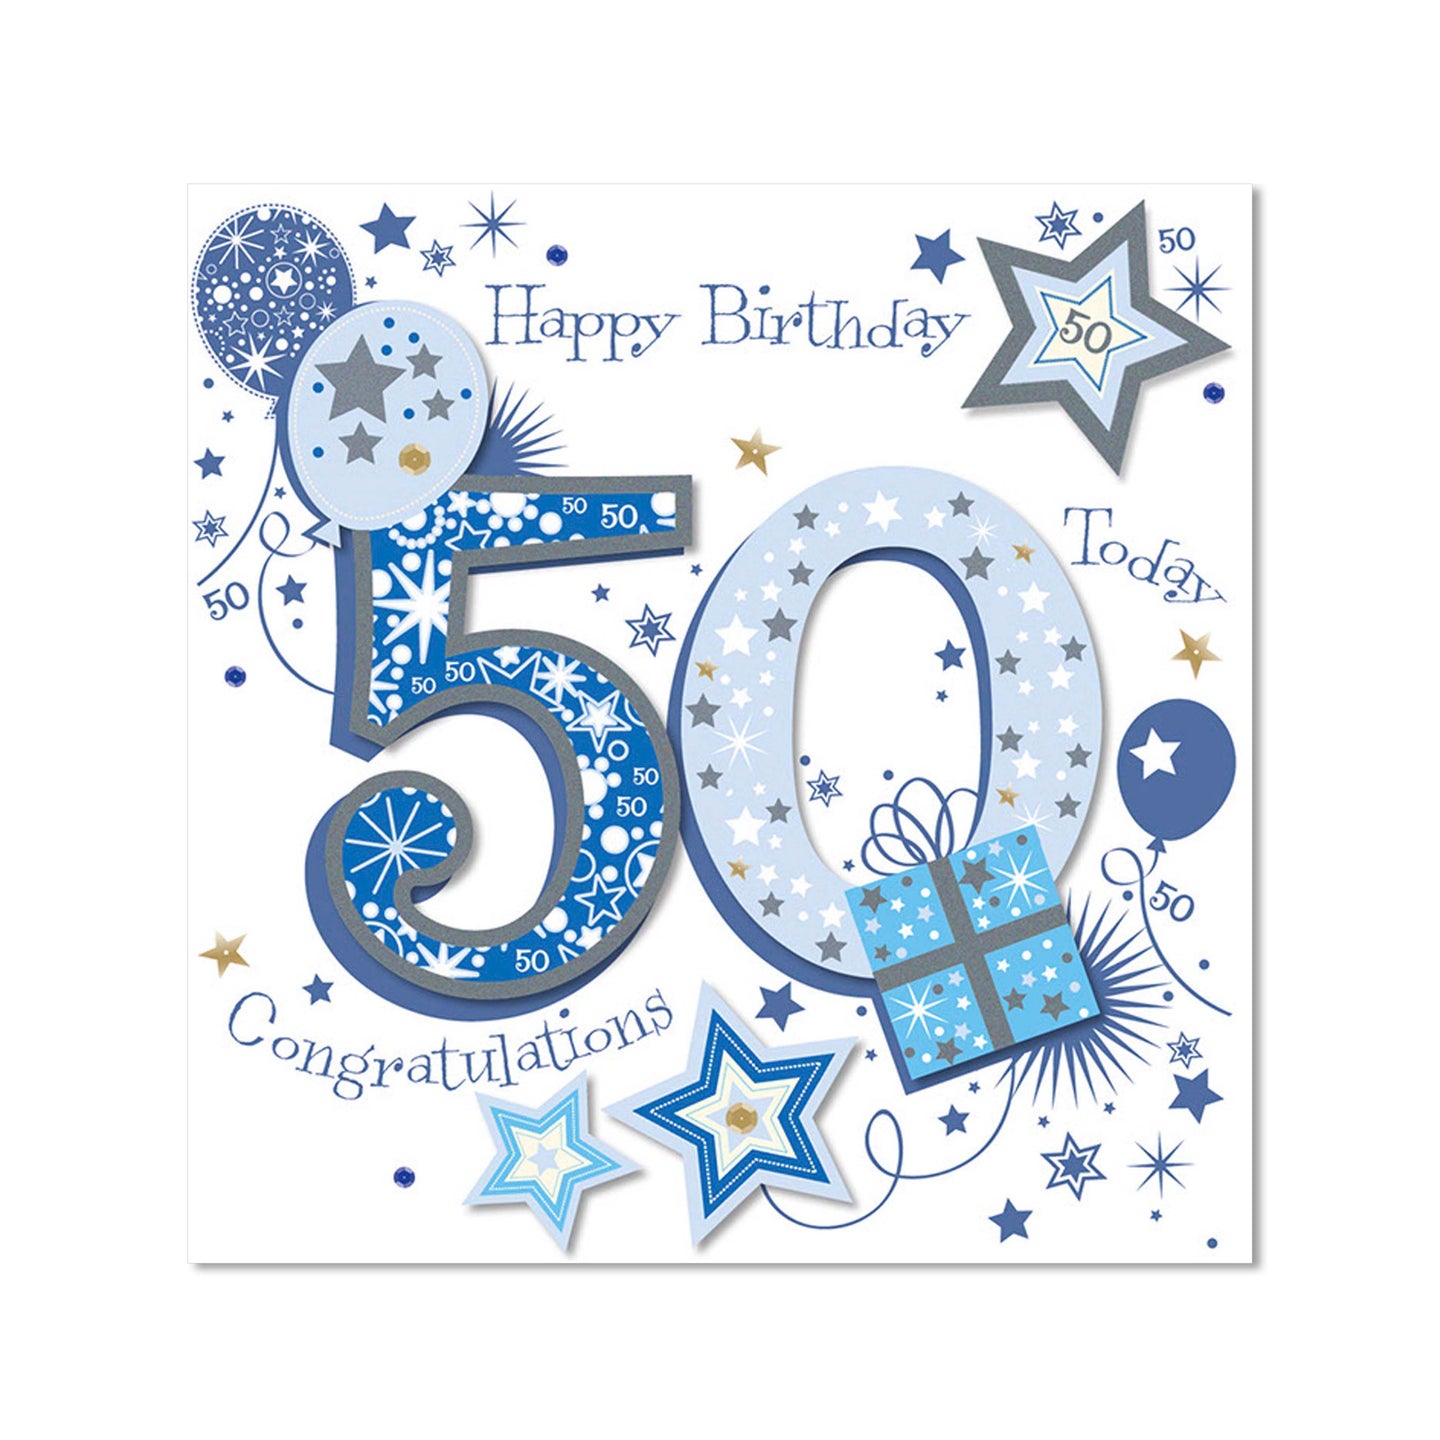 Card - Happy Birthday 50 Today Congratulations Silver (More Than Words Lge)